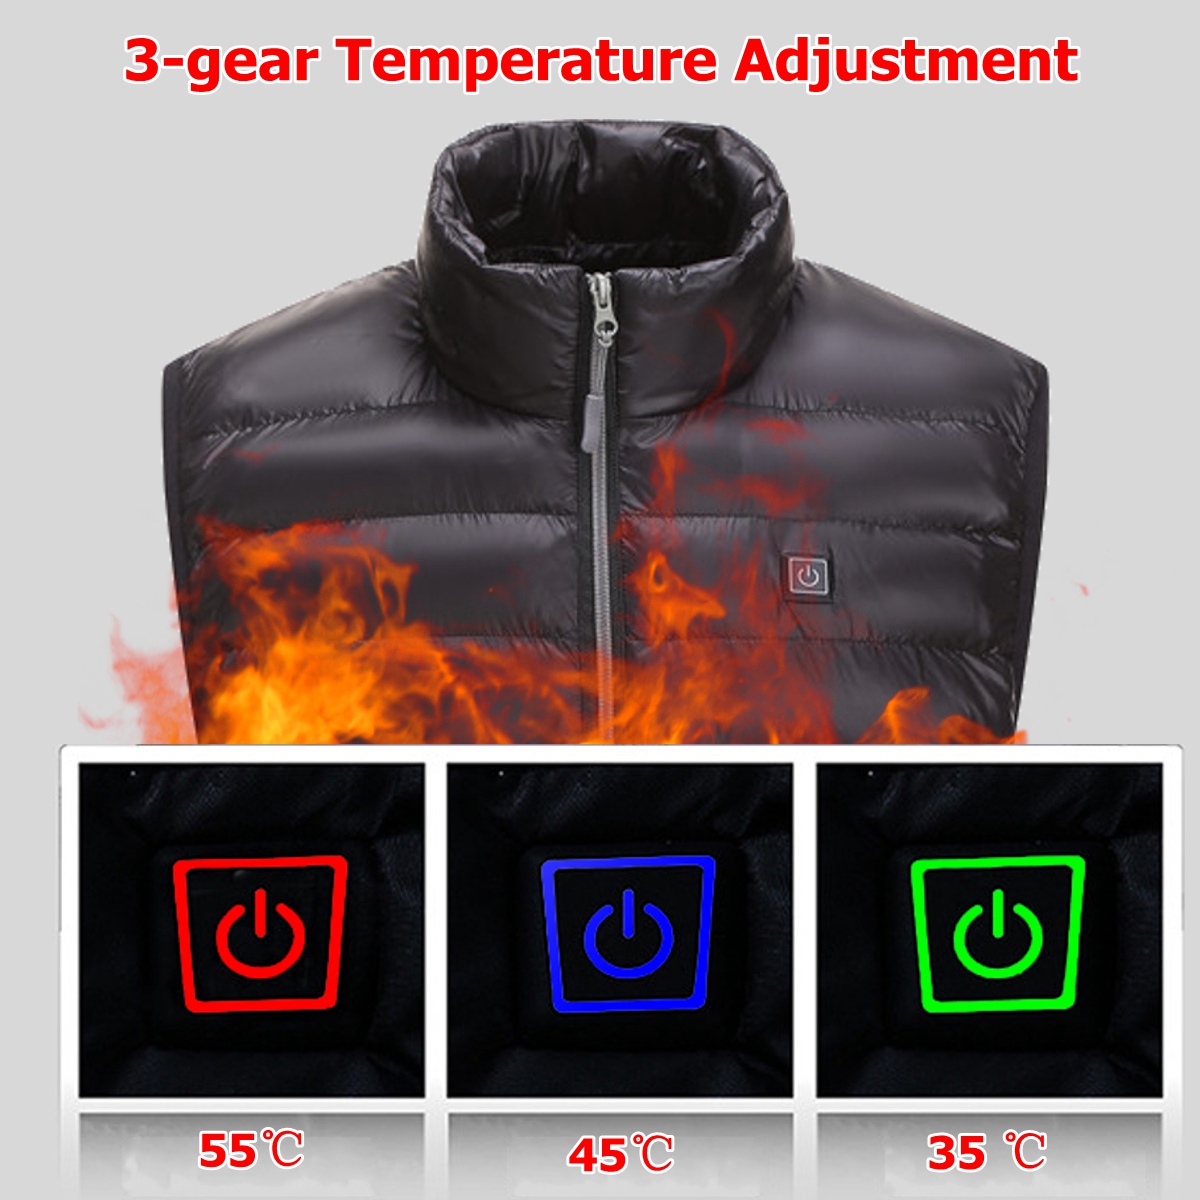 USB Electric Vest Heated Cloth Jacket Warm Up Heating Pad Body Winter